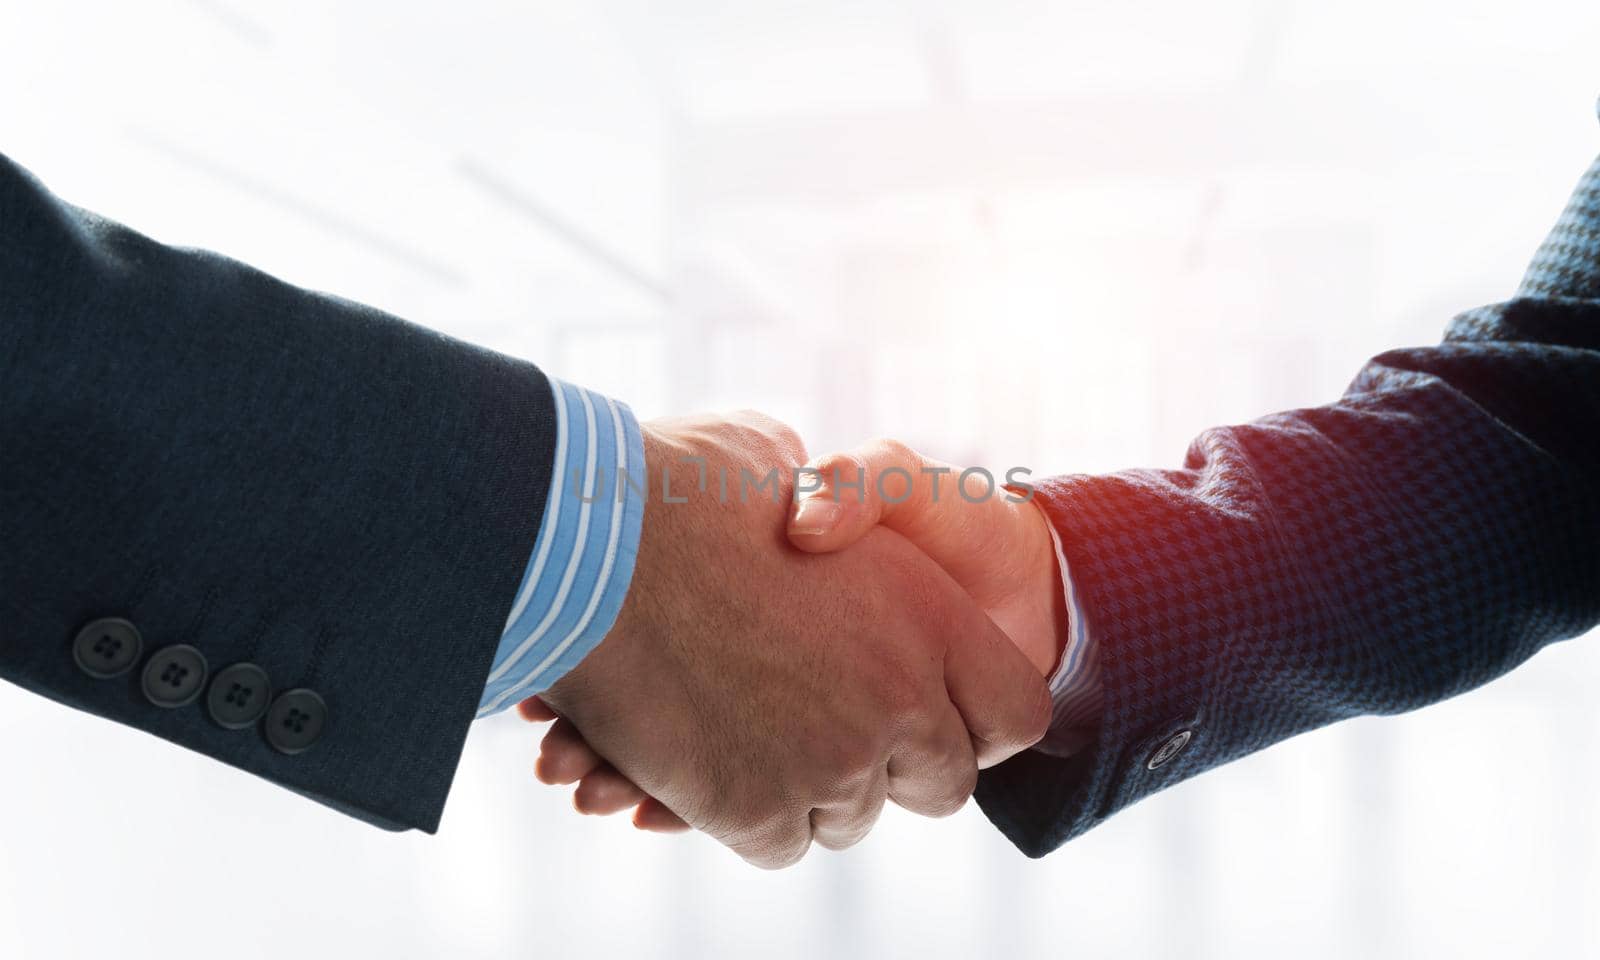 A close-up of a handshake. Making a deal between two businessmen